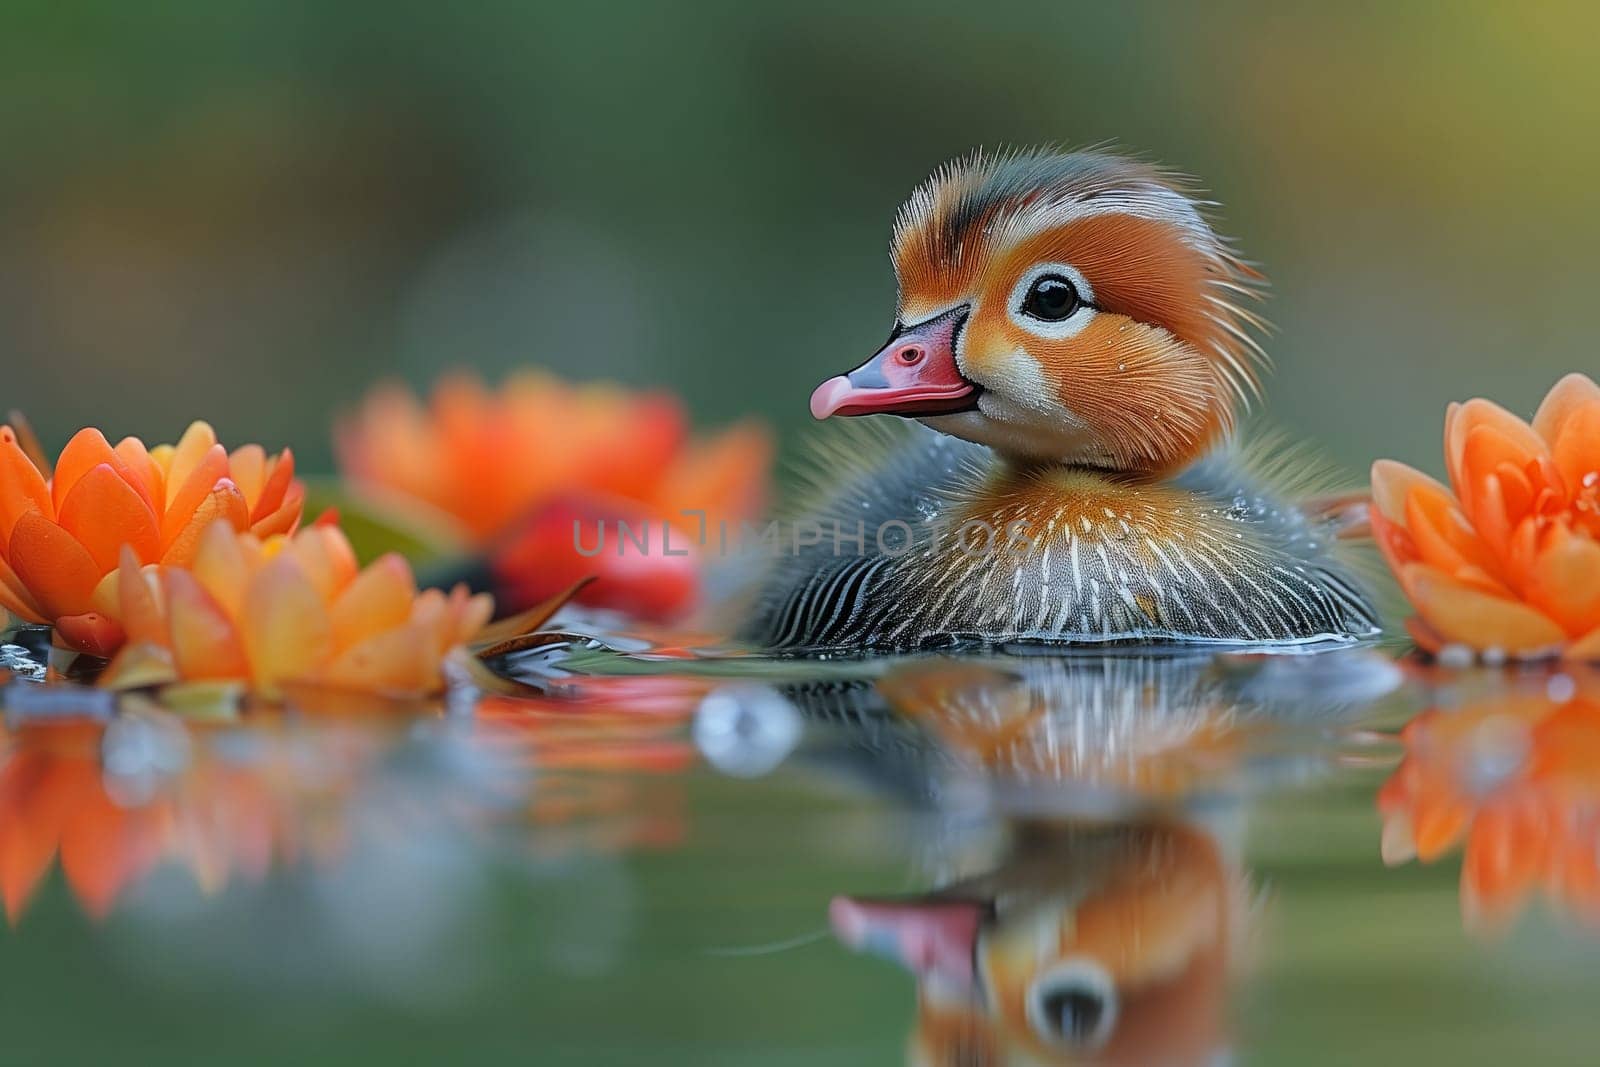 A baby duck with fluffy feathers is swimming in a tranquil pond adorned with orange flowers. The natural landscape is enhanced by the presence of waterfowl such as ducks, geese, and swans